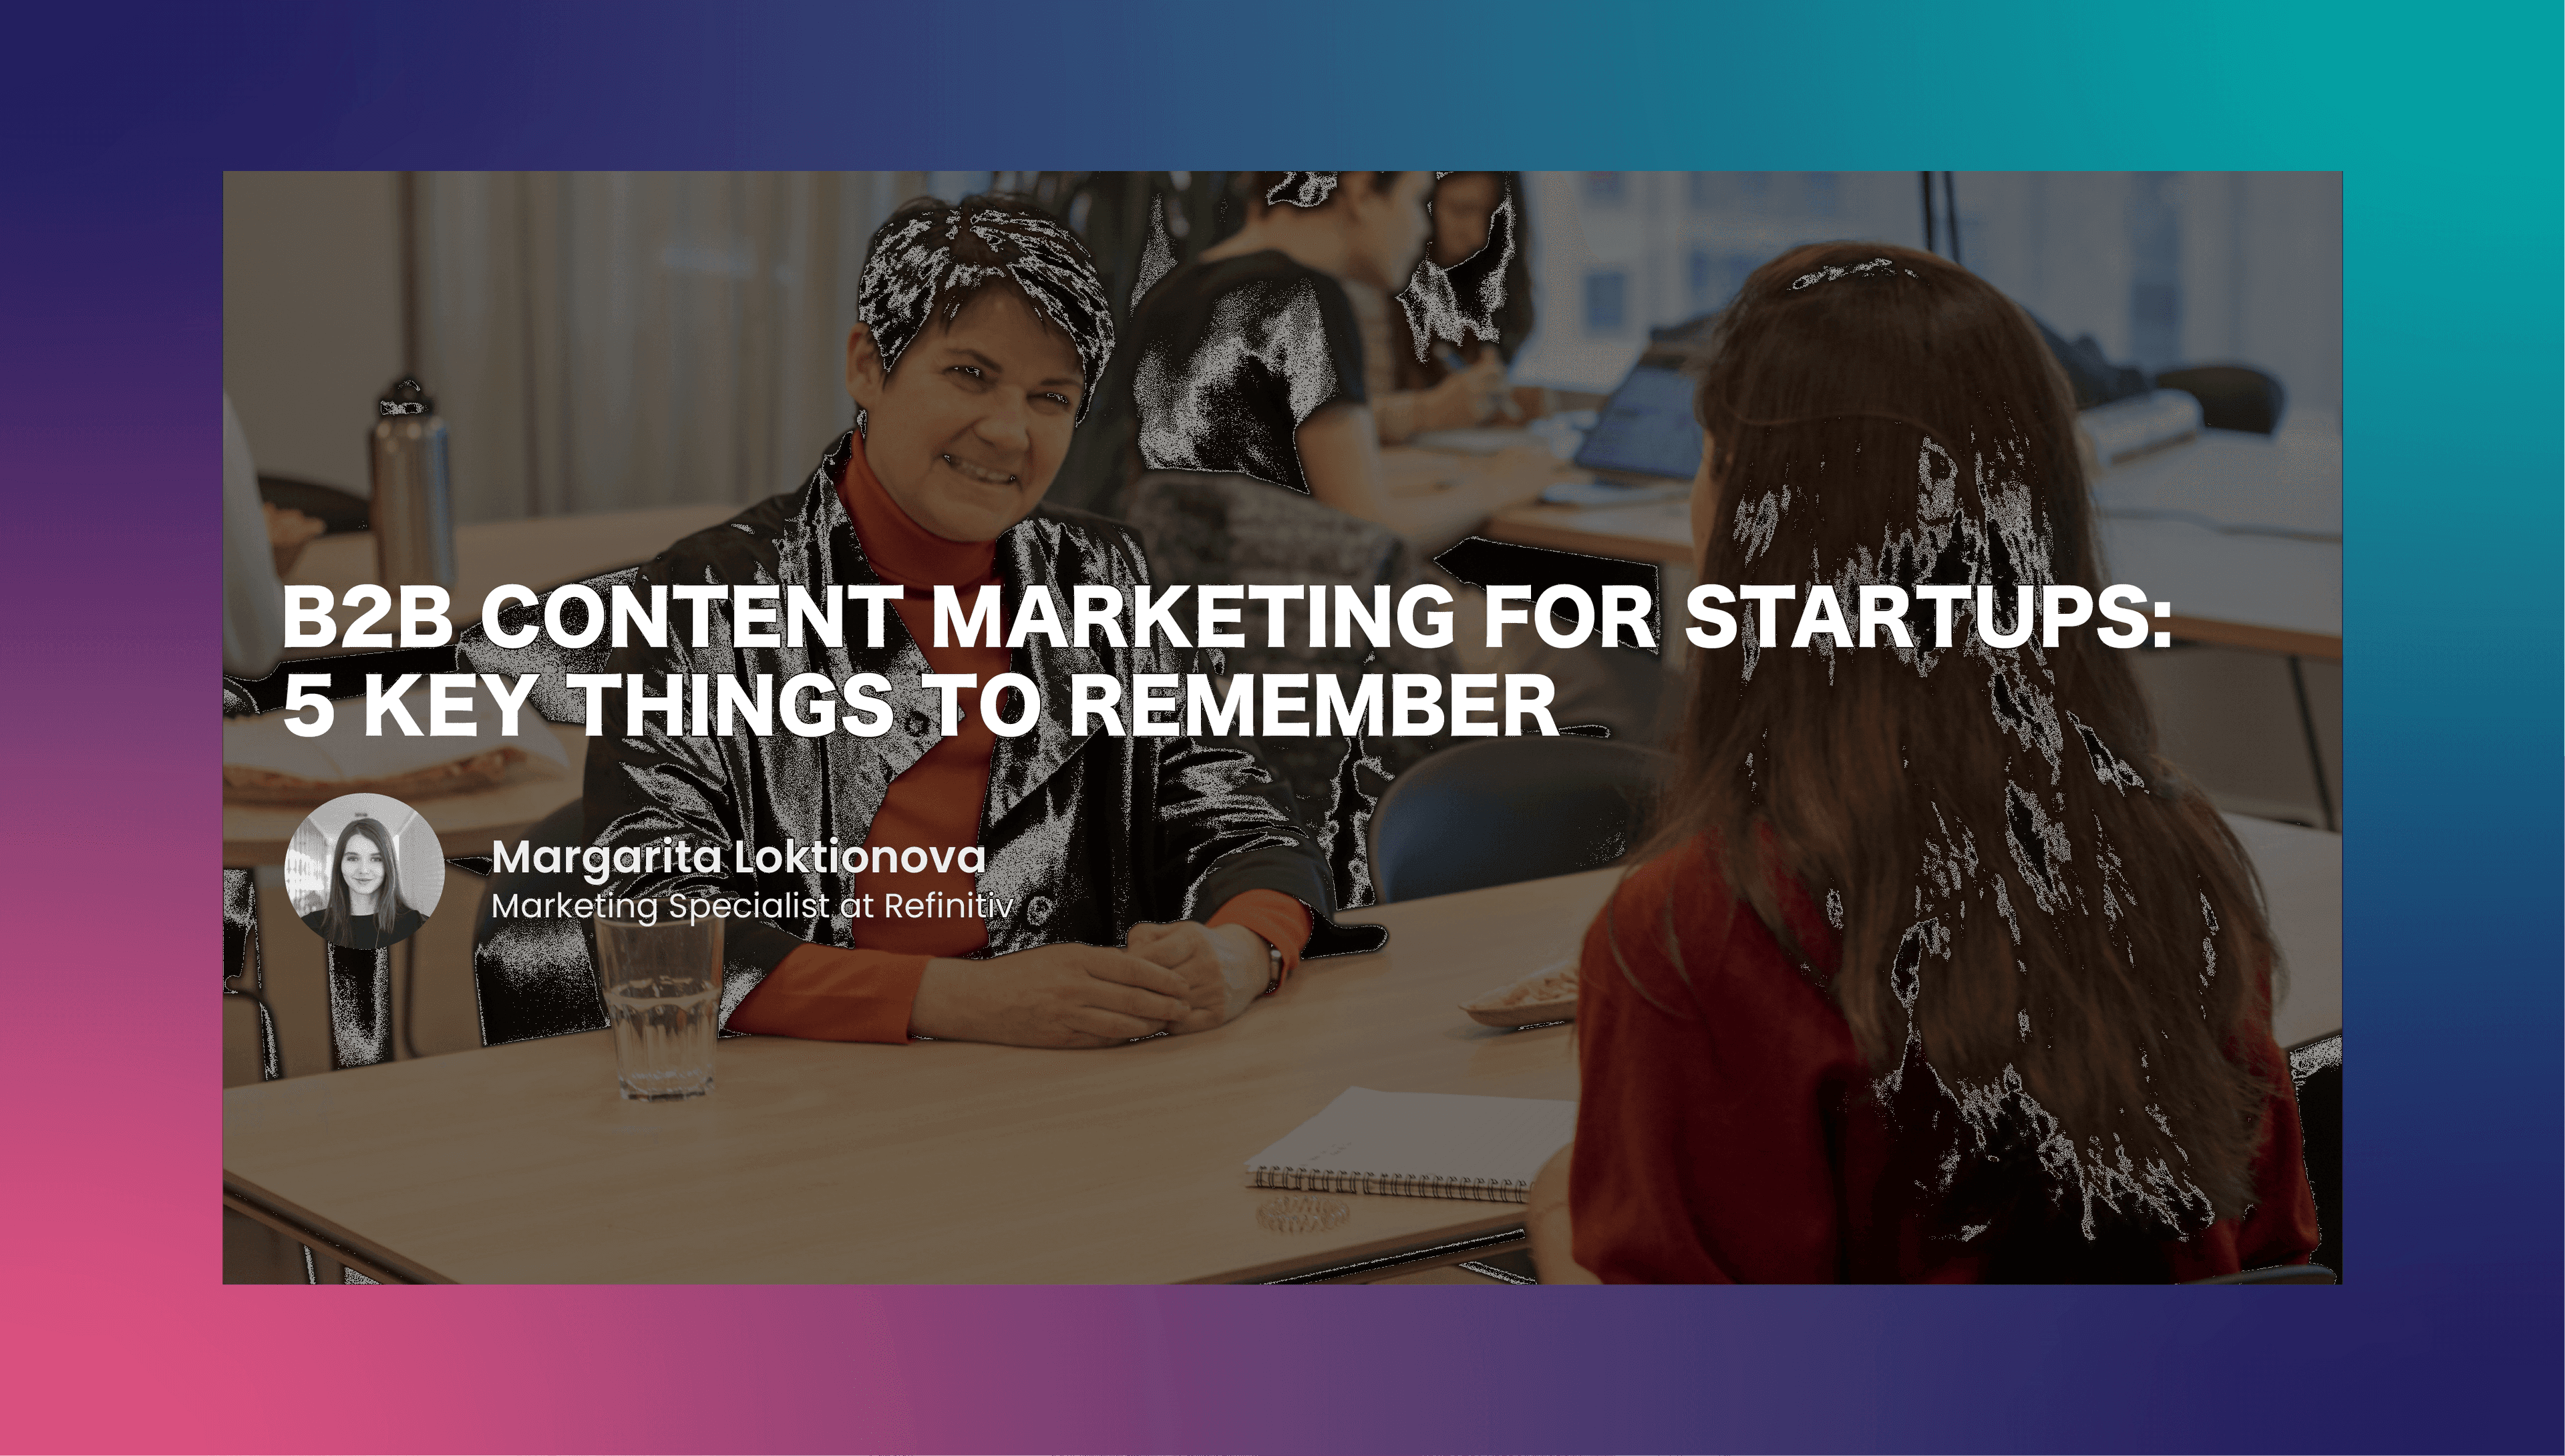 B2B Content Marketing For Startups: 5 Key Things To Remember